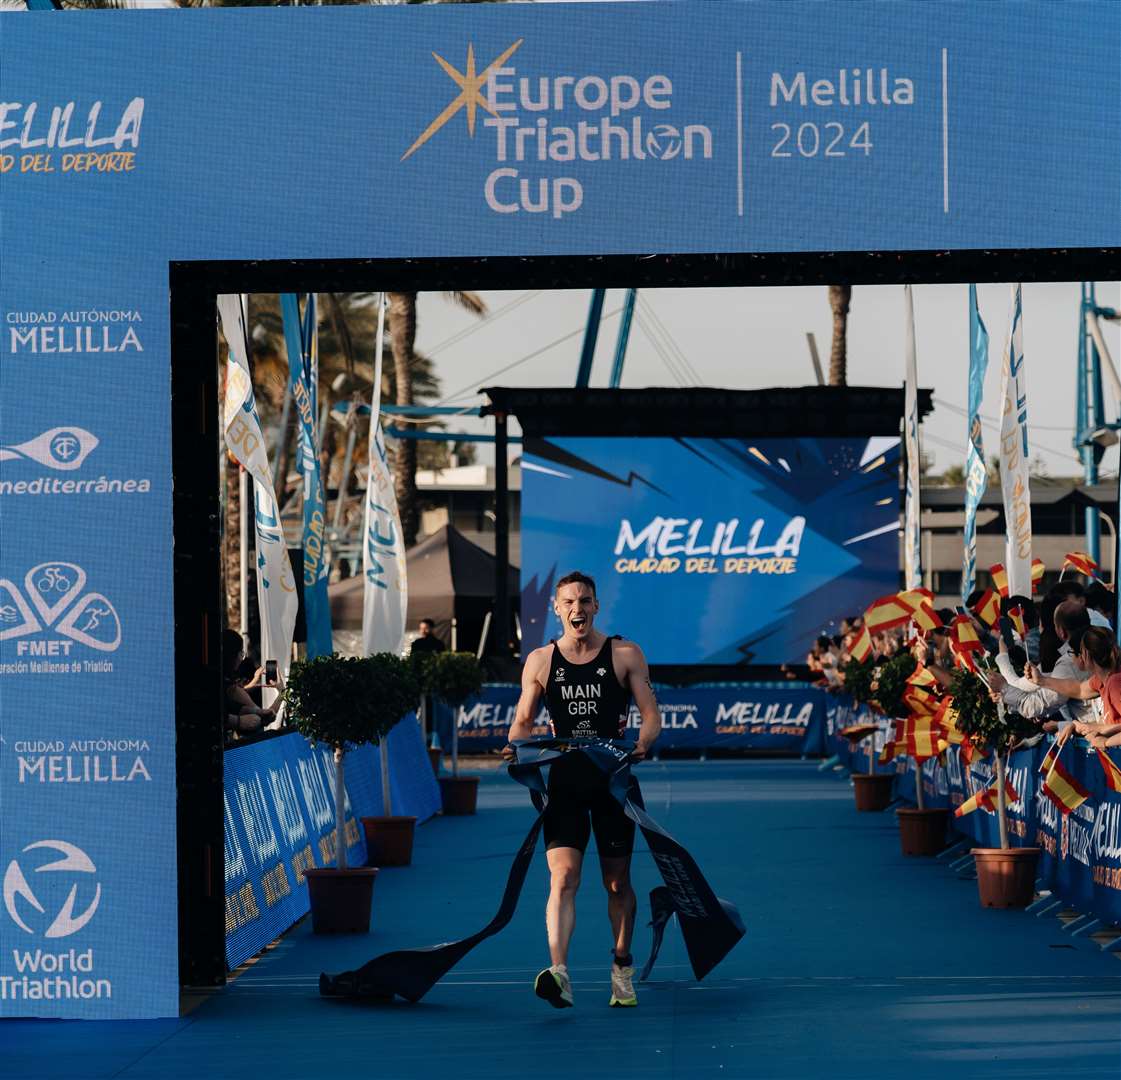 Cameron Main breaks the tape to win the Europe Cup race in Melilla.